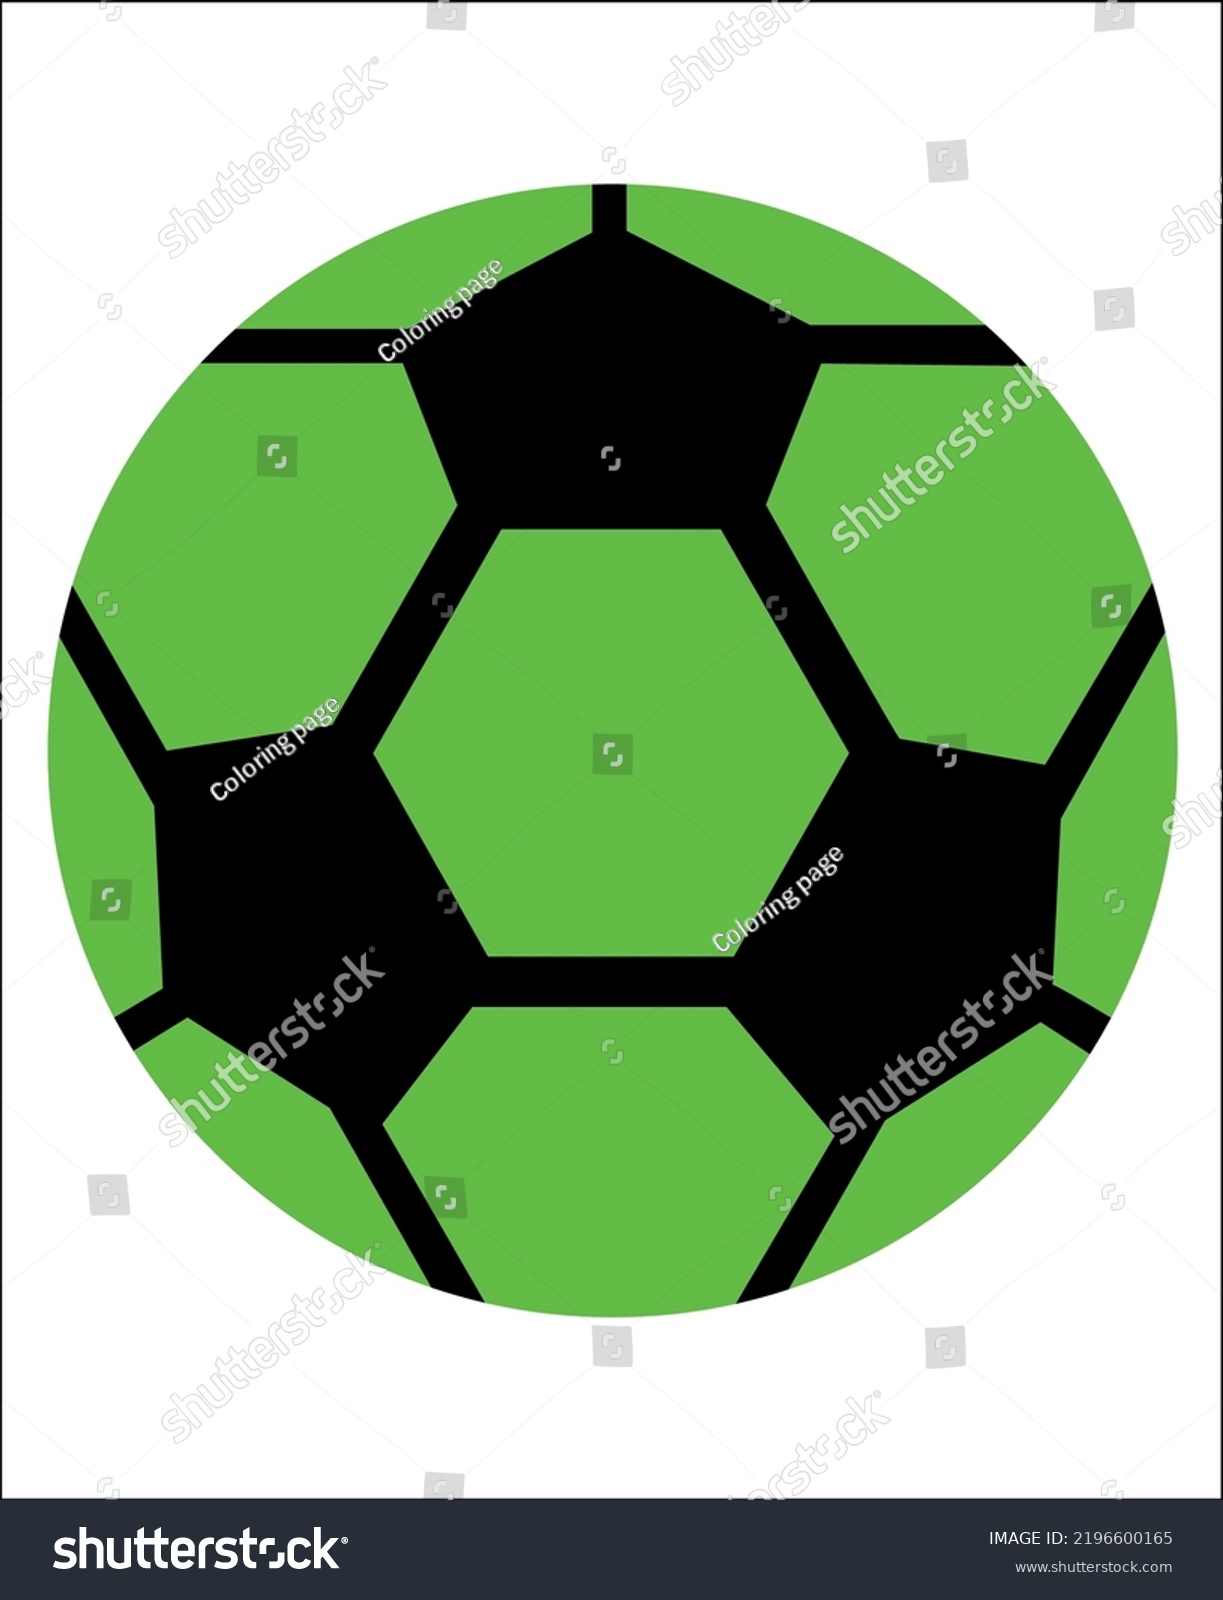 football-coloring-page-coloring-book-page-stock-vector-royalty-free-2196600165-shutterstock